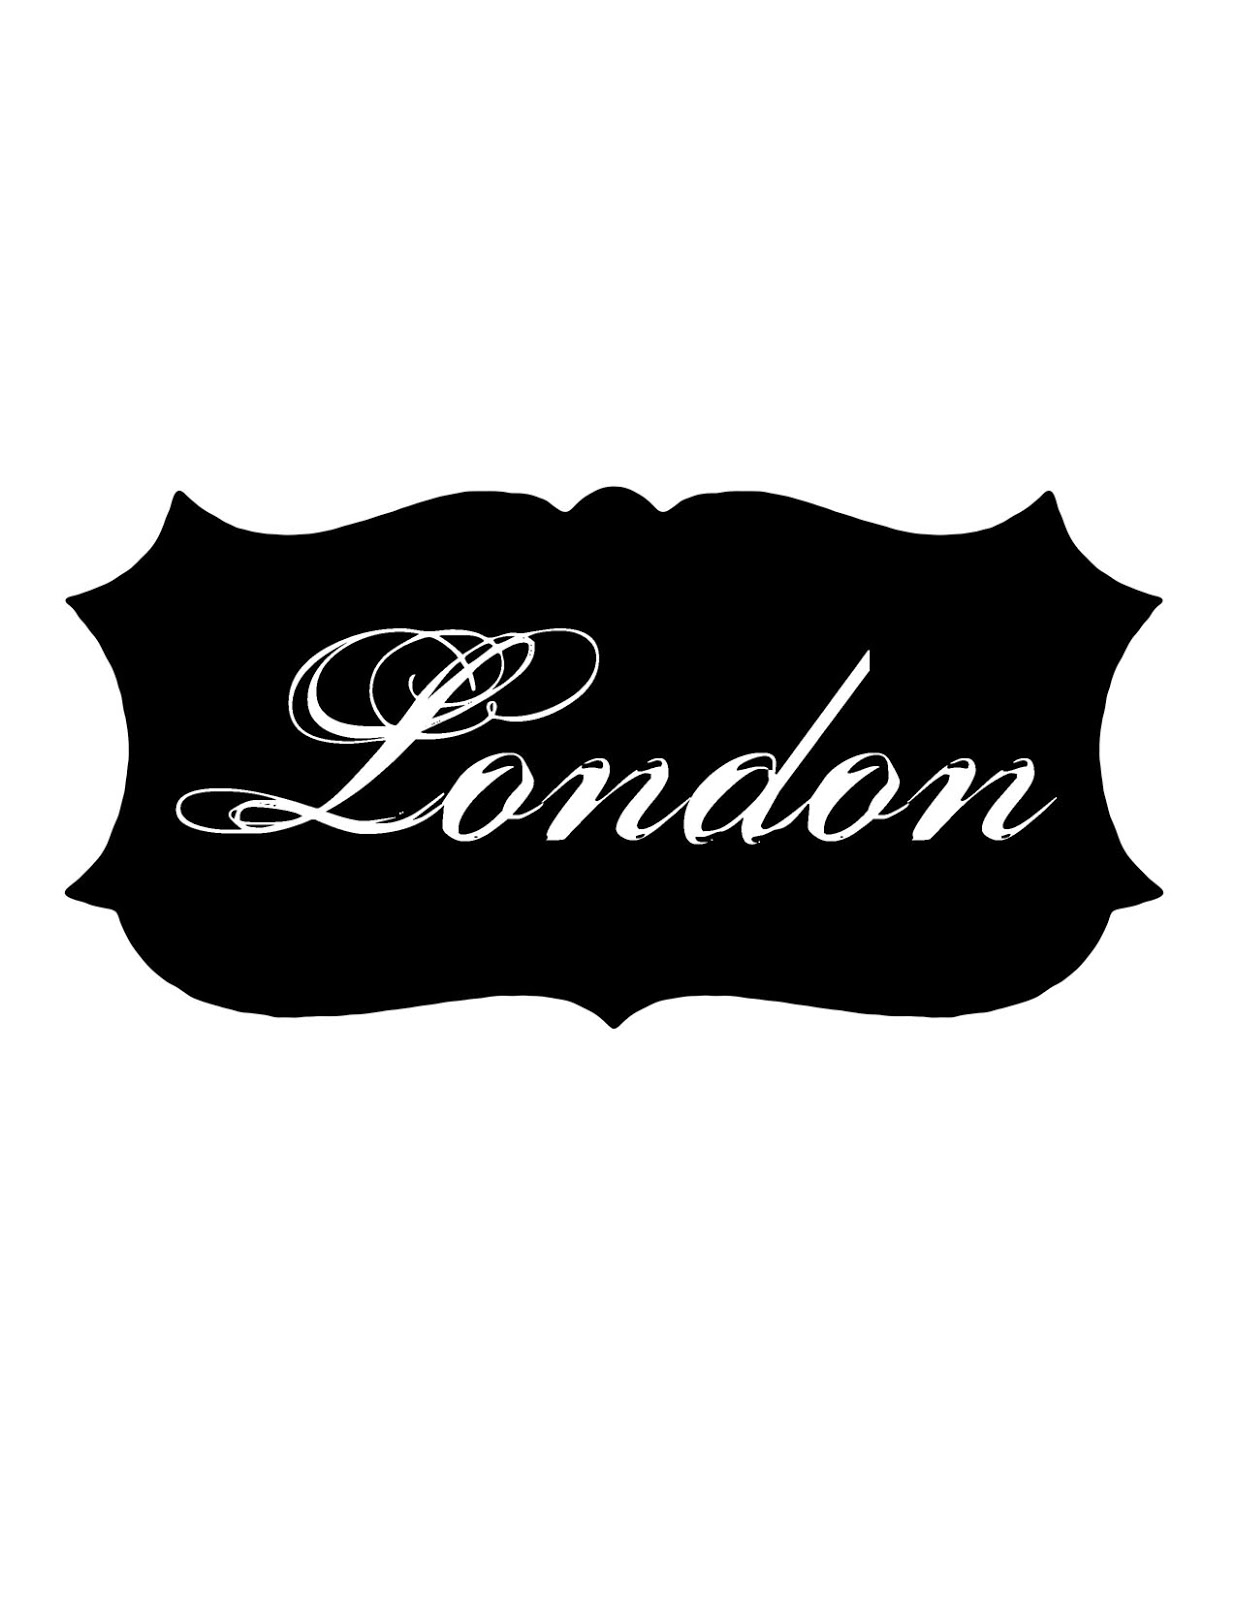 Iron on Images - London Label - The Graphics Fairy1236 x 1600